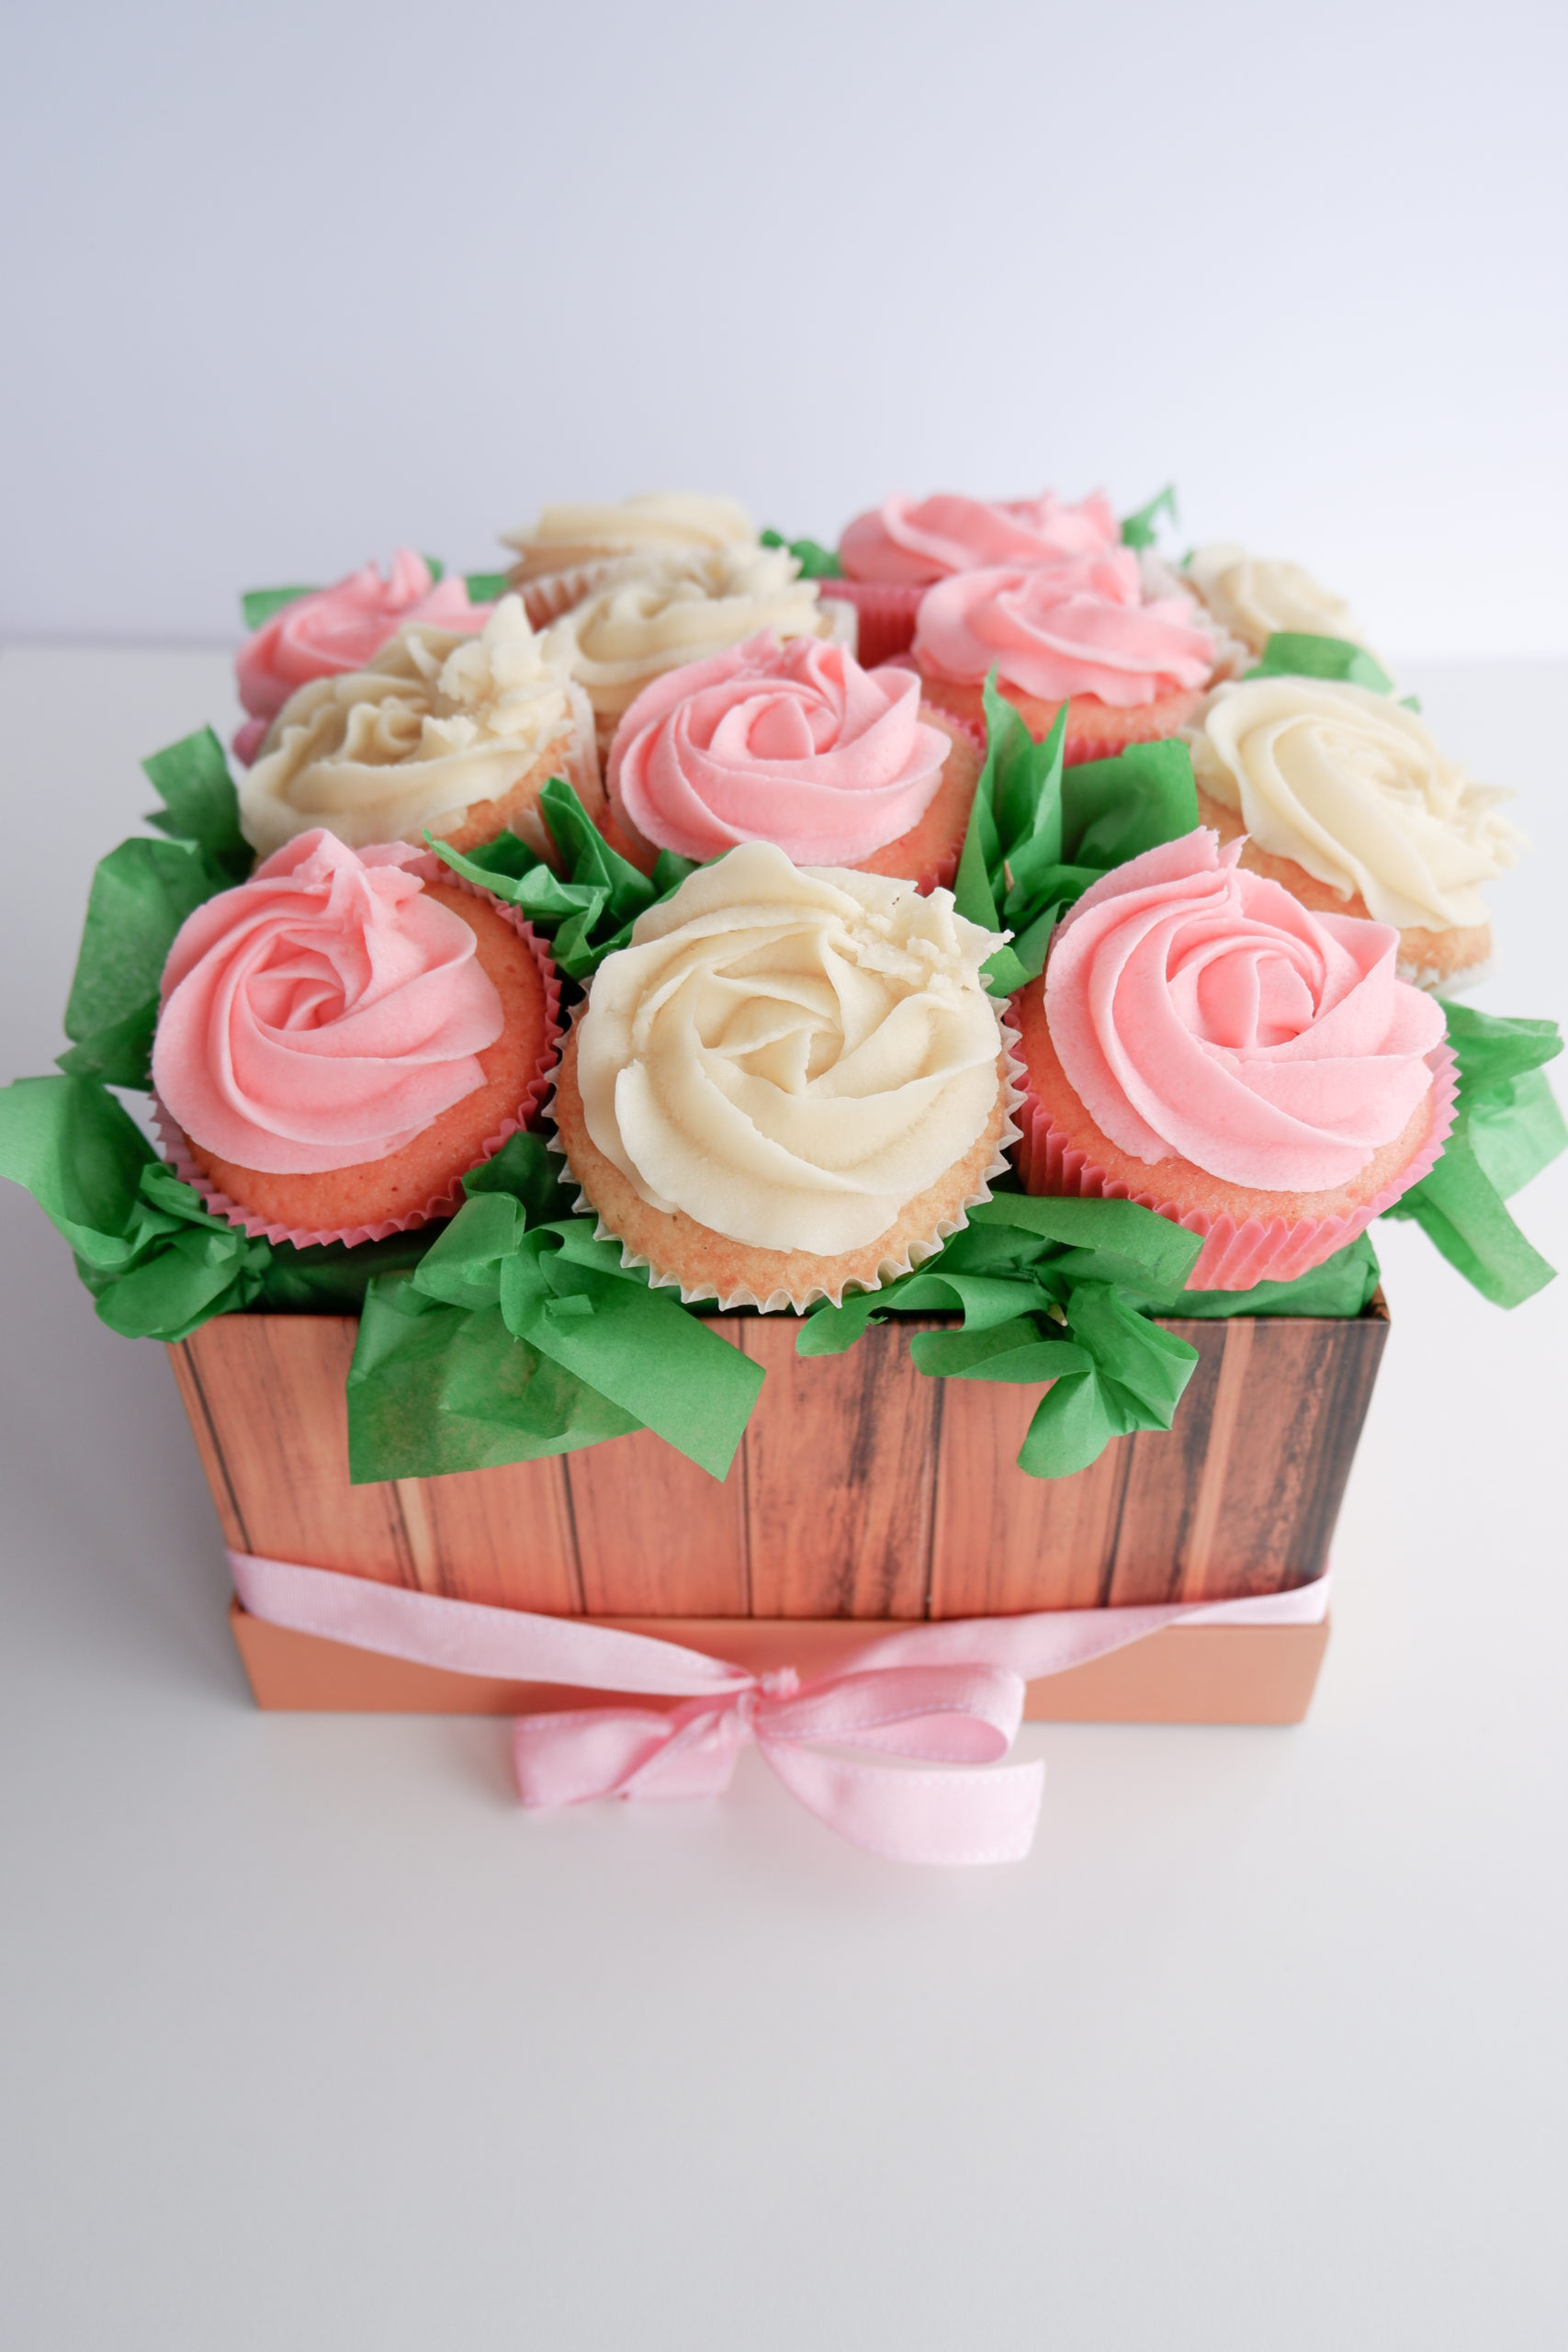 How to Build a Cupcake Bouquet